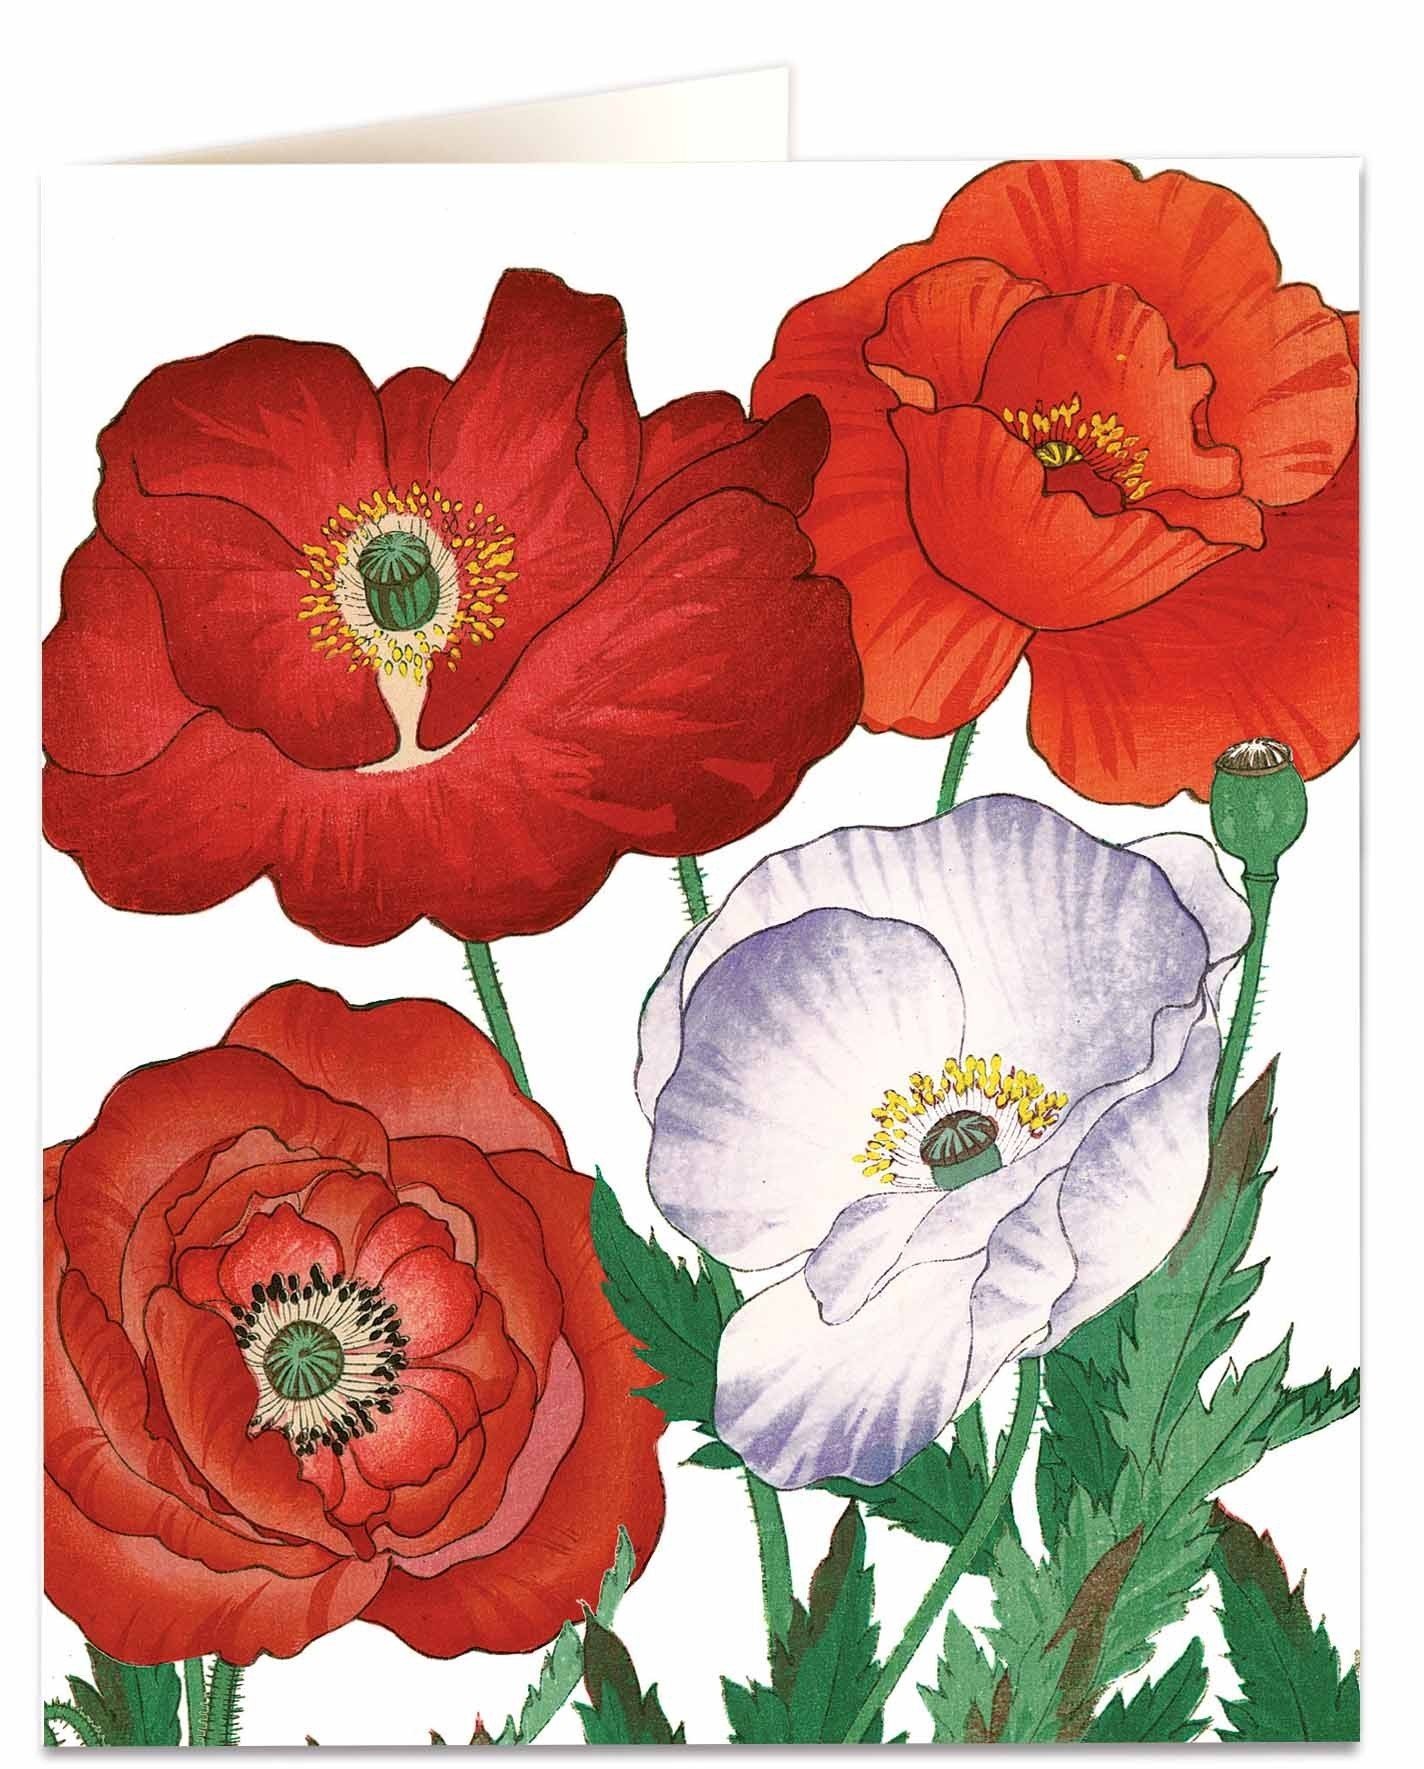 poppies-natural-history-museum-natural-history-museum-from